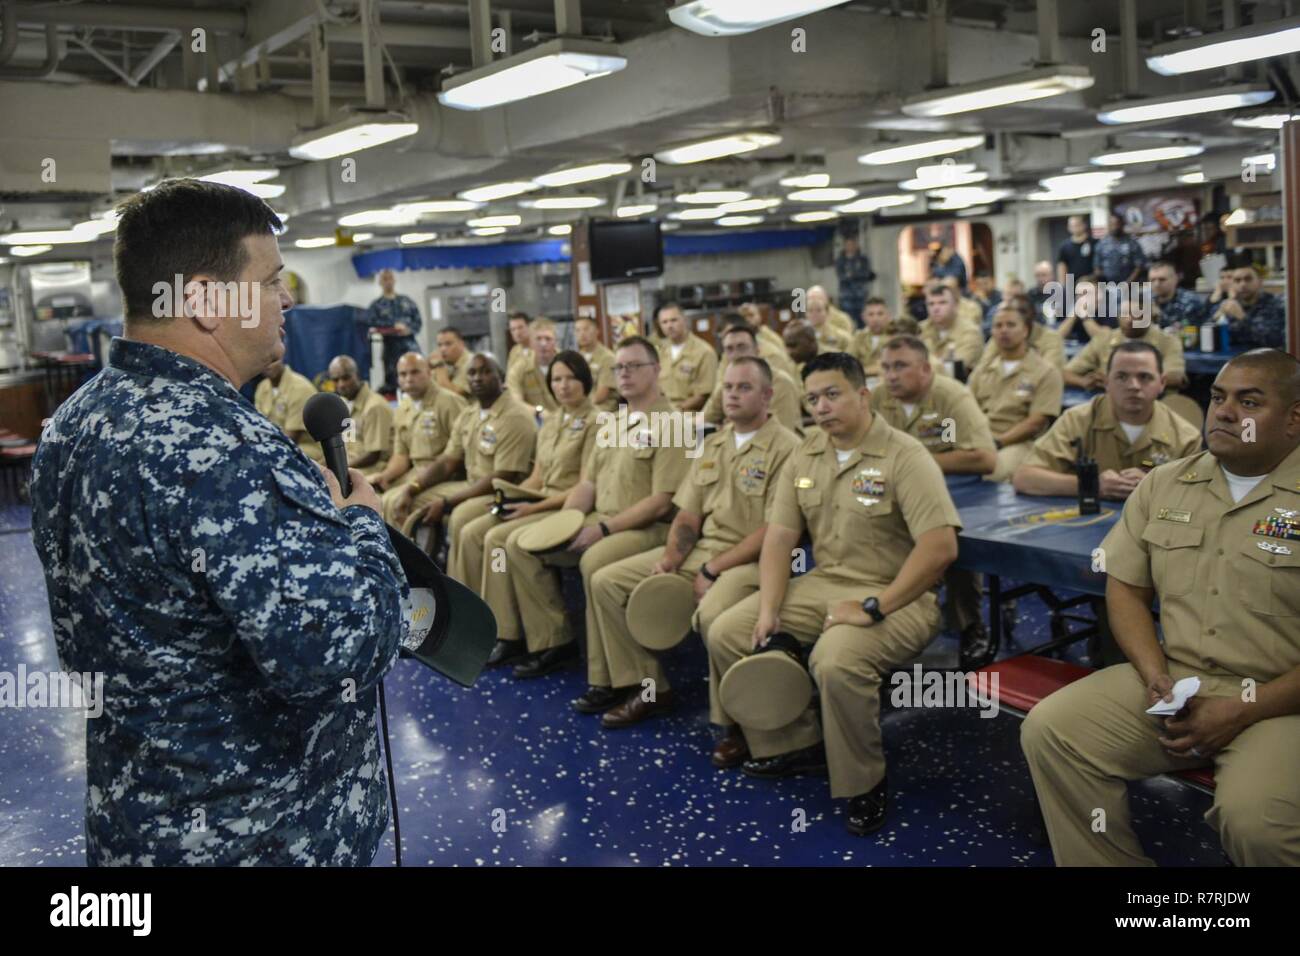 MAYPORT, Fla. (March 31, 2017) Capt. James R. Midkiff, commanding officer of the amphibious assault ship USS Iwo Jima (LHD 7), speaks with the ship's chief petty officers during a celebration for the 124th birthday of the chief petty officer rank. Iwo Jima recently returned from conducting a series of qualifications and certifications as part of the basic phase of training in preparation for future operations and deployments. Stock Photo